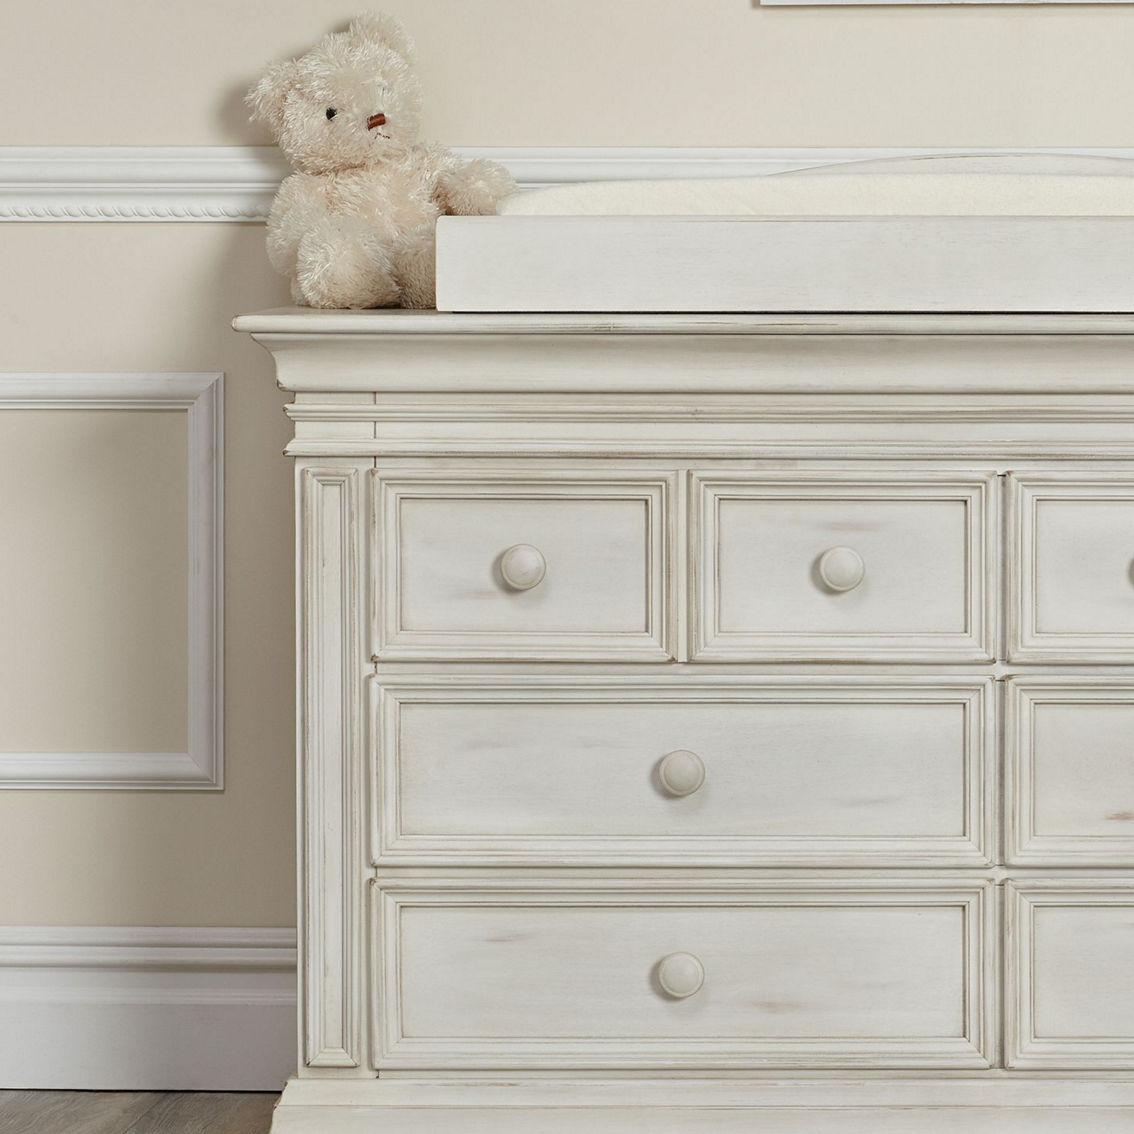 Baby Cache Vienna Changing Topper Antique White